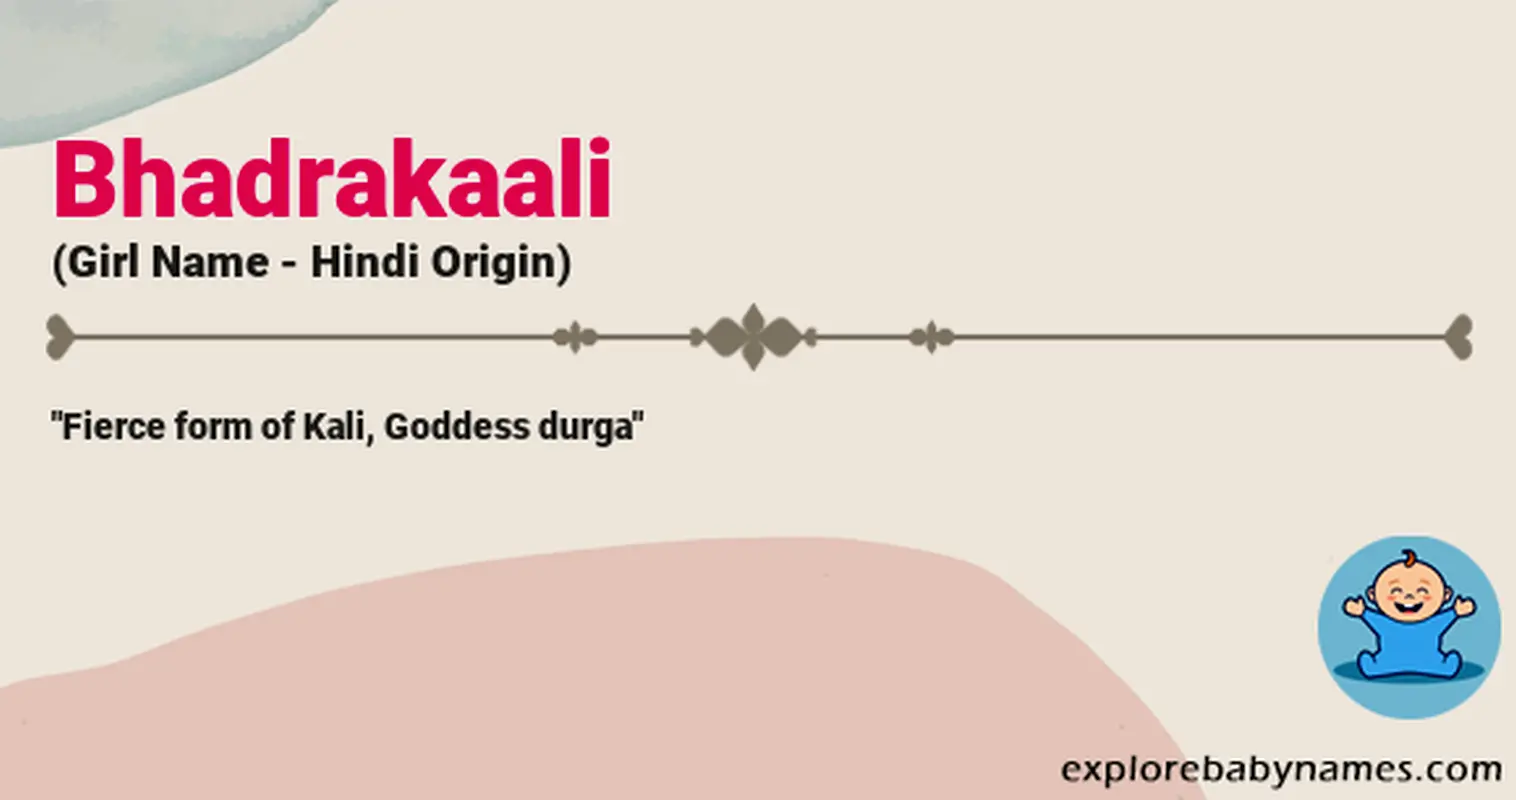 Meaning of Bhadrakaali